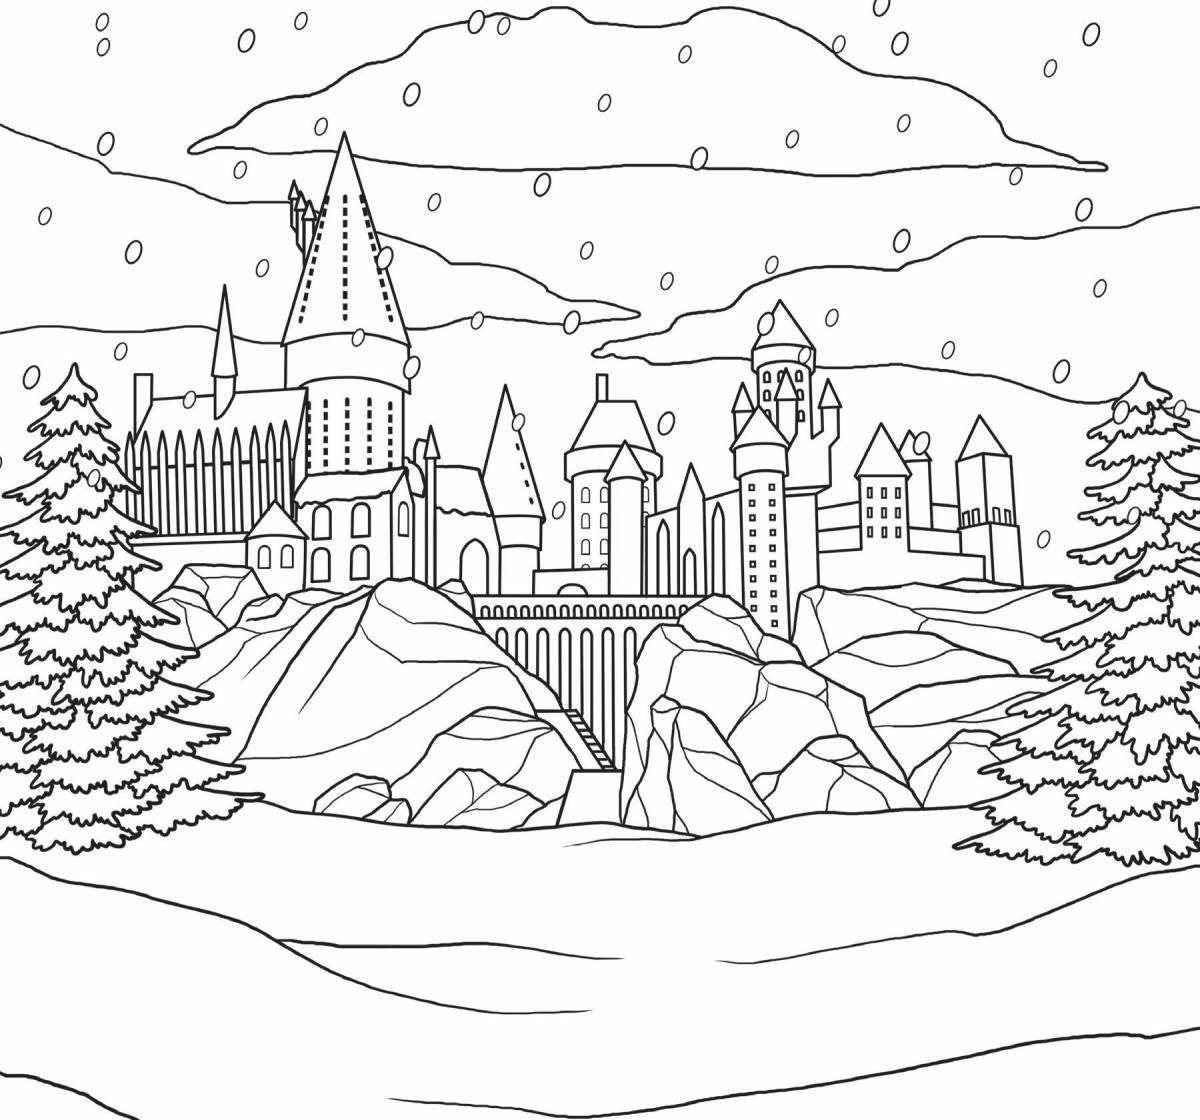 Amazing snow castle coloring page for kids